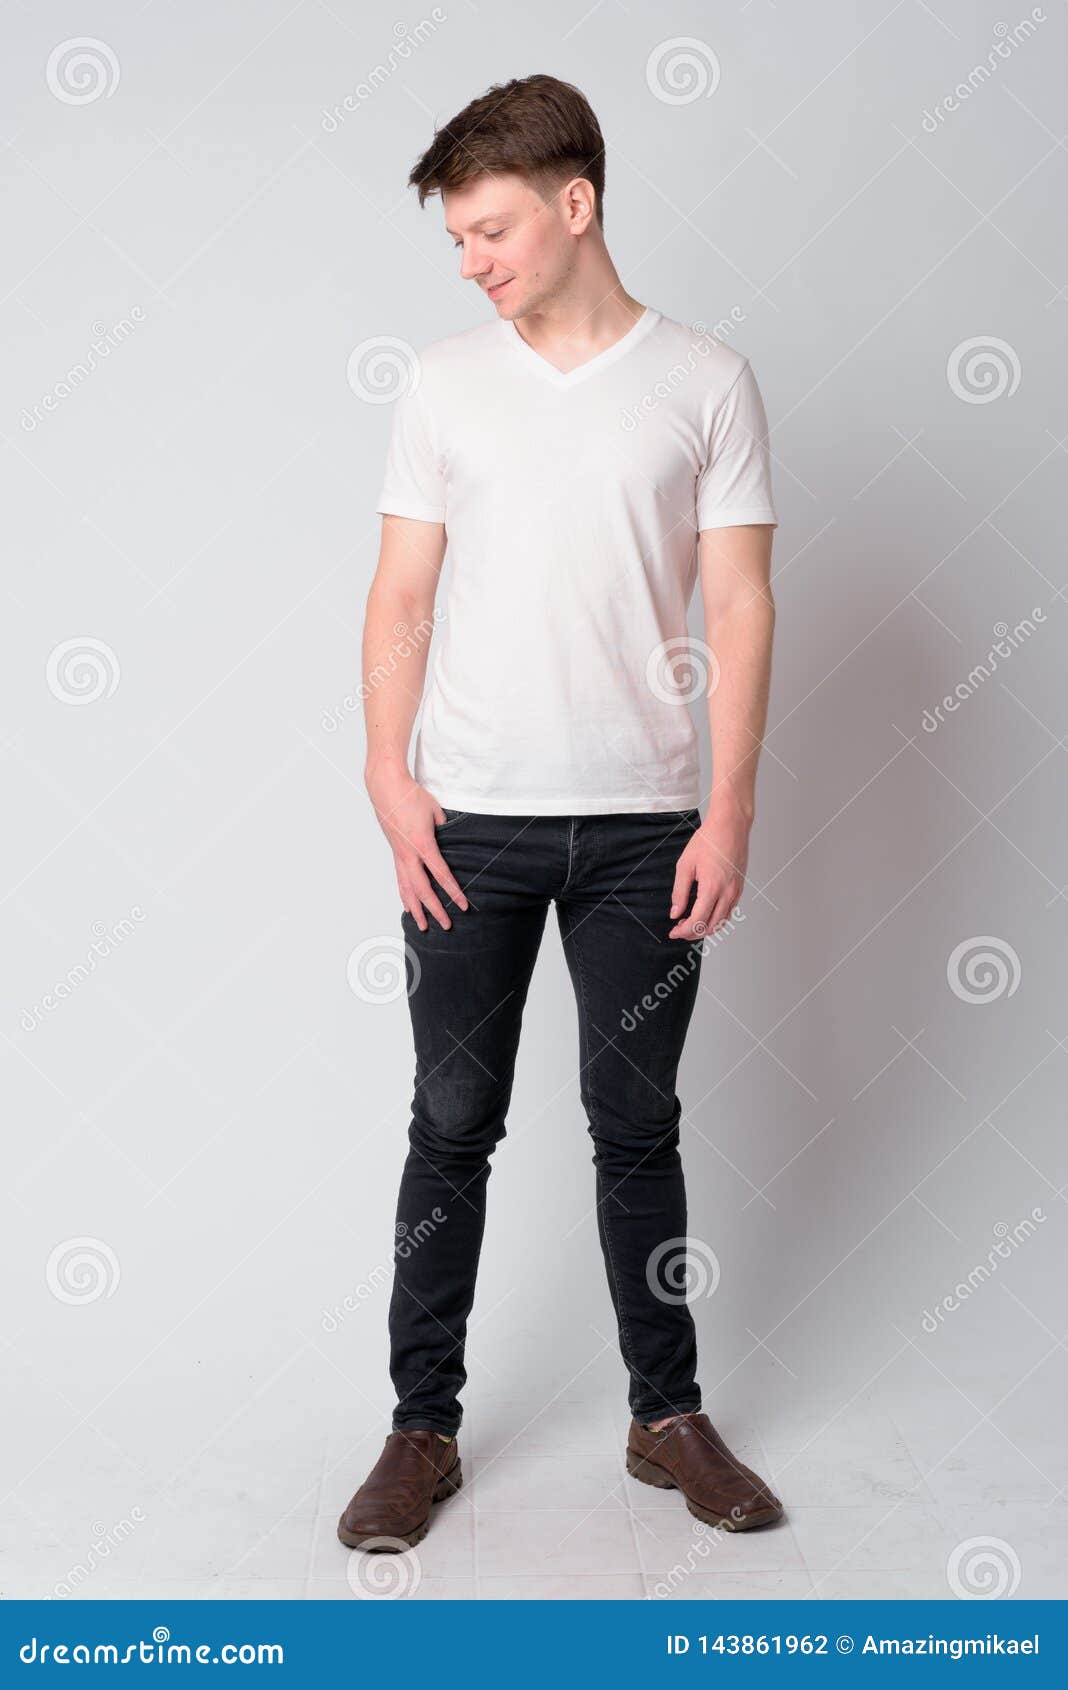 Full Body Shot of Young Handsome Man Looking Down Stock Photo - Image ...